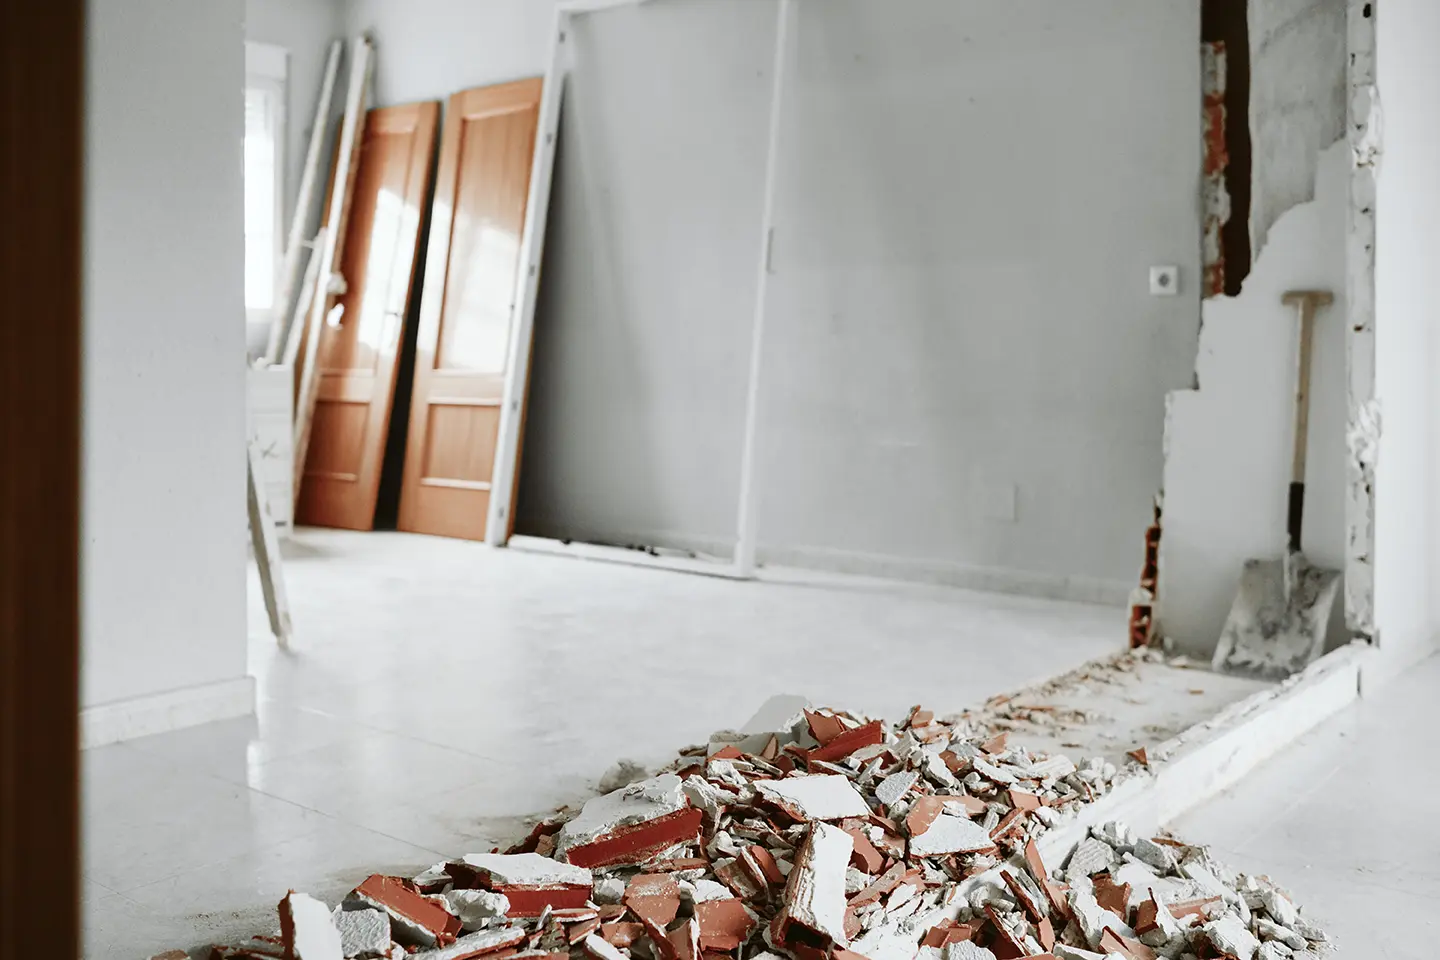 Benefits of Renting a Dumpster for Home Renovation Projects